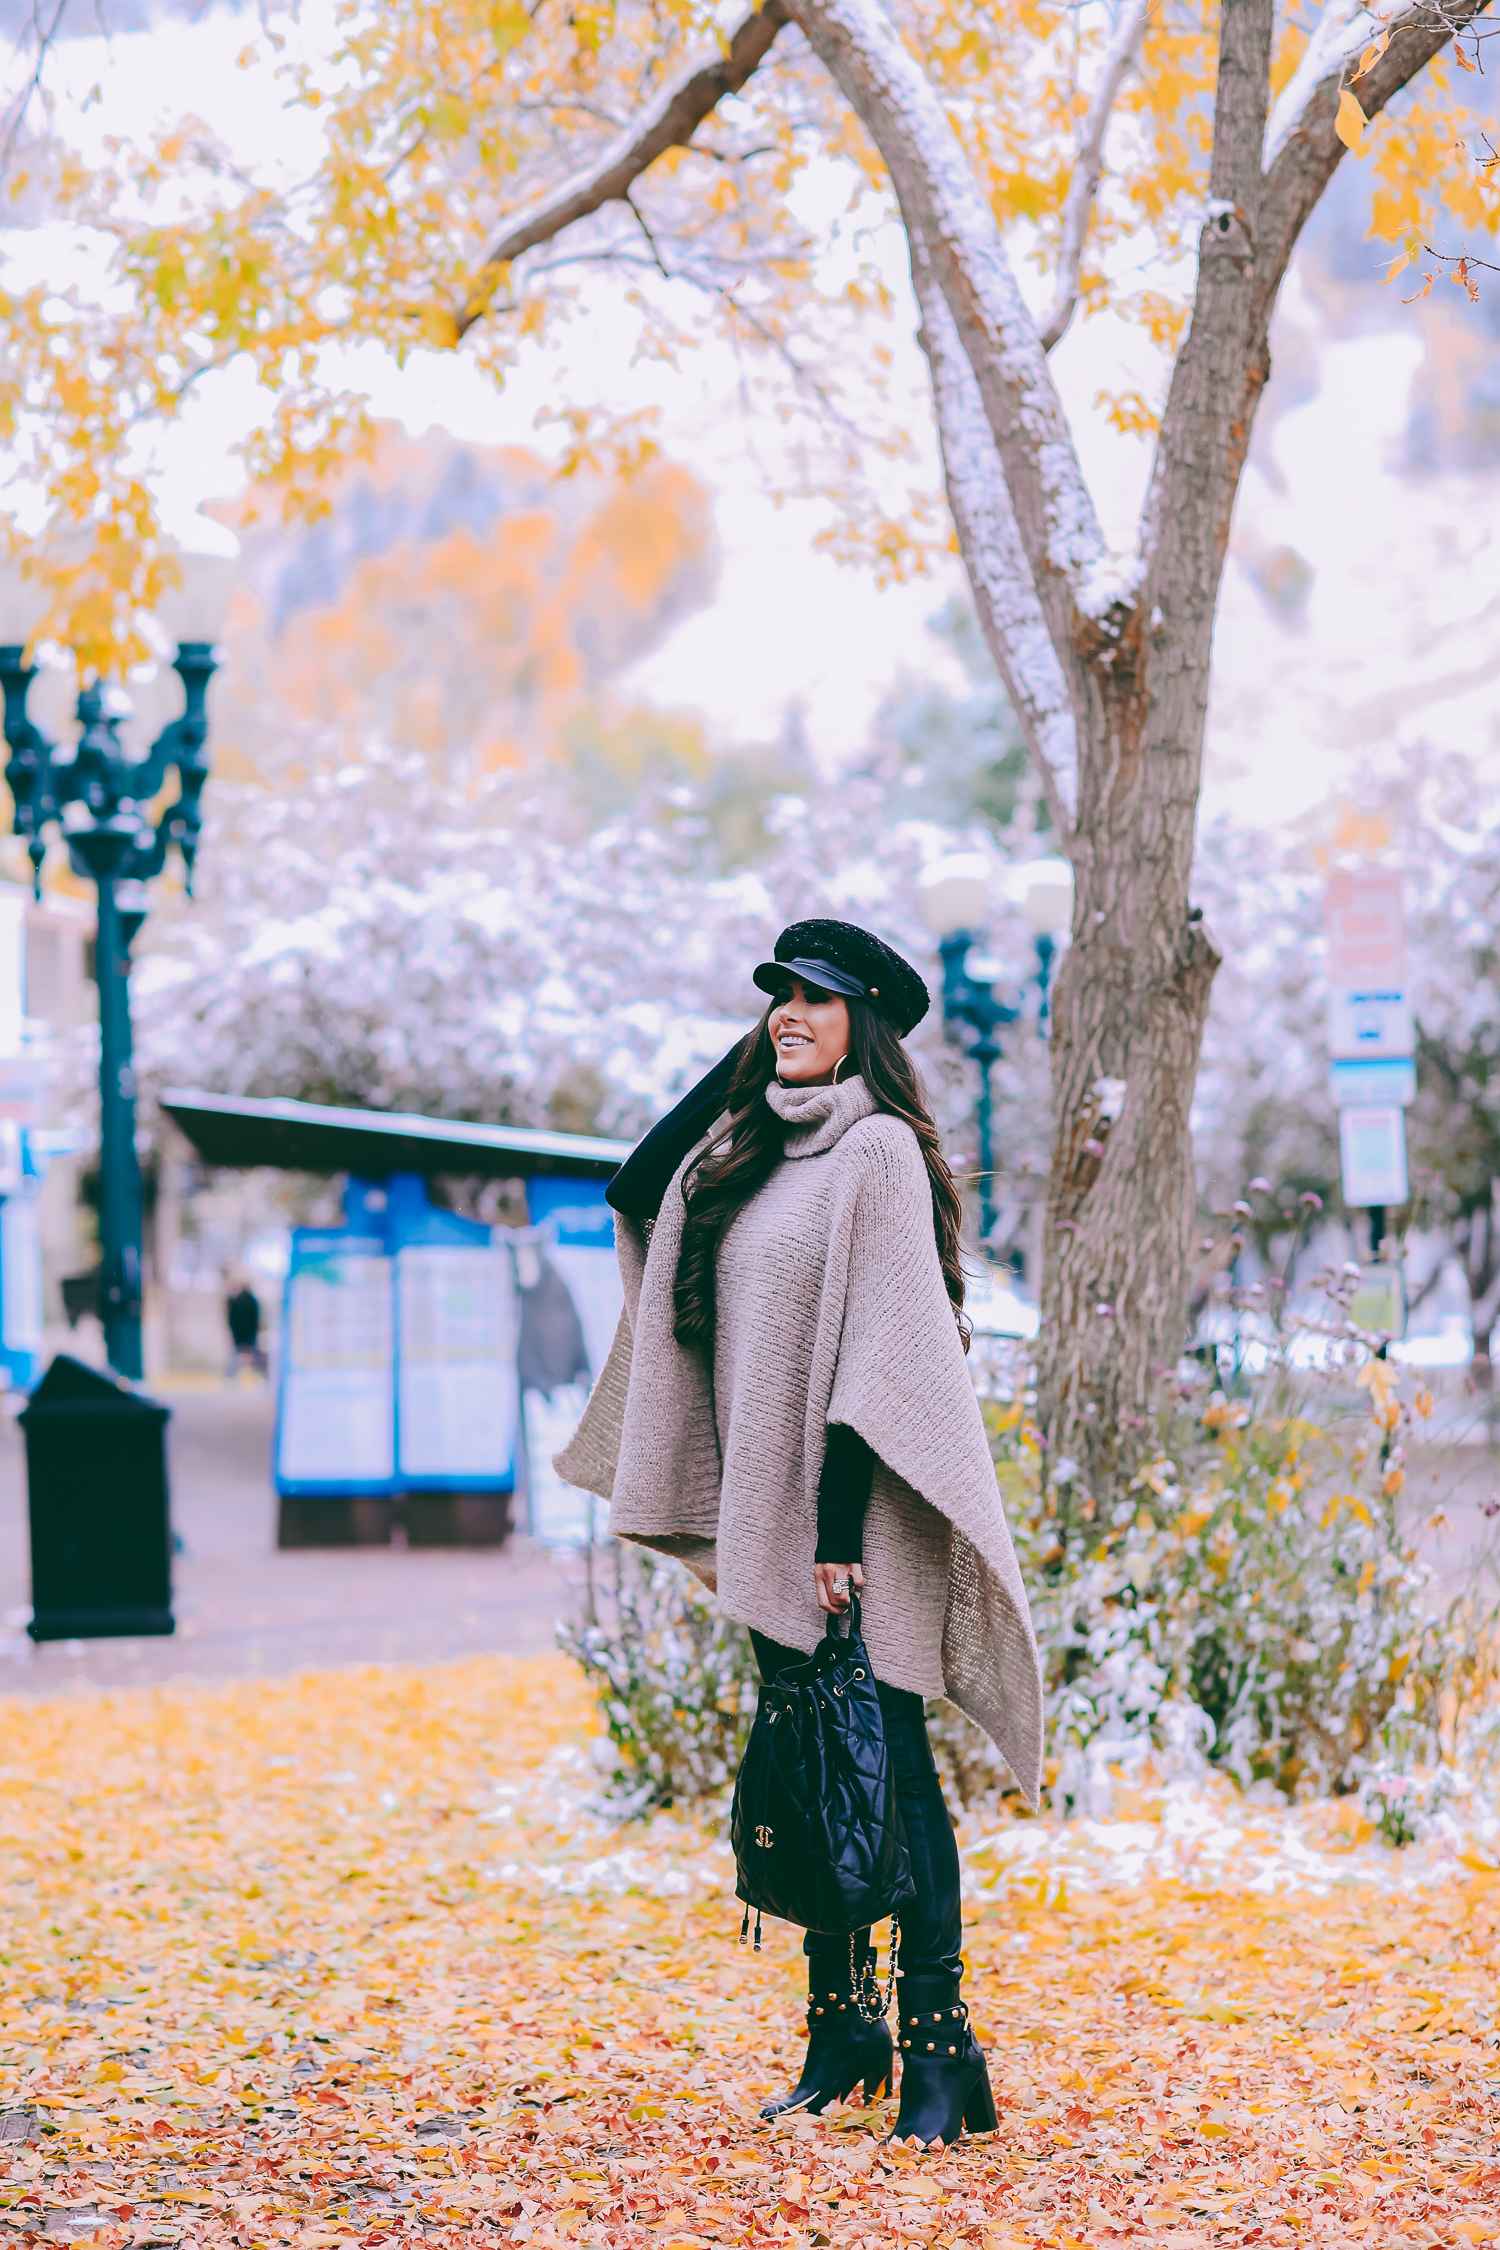 OOTD: Snow Day Chic - OpalbyOpal